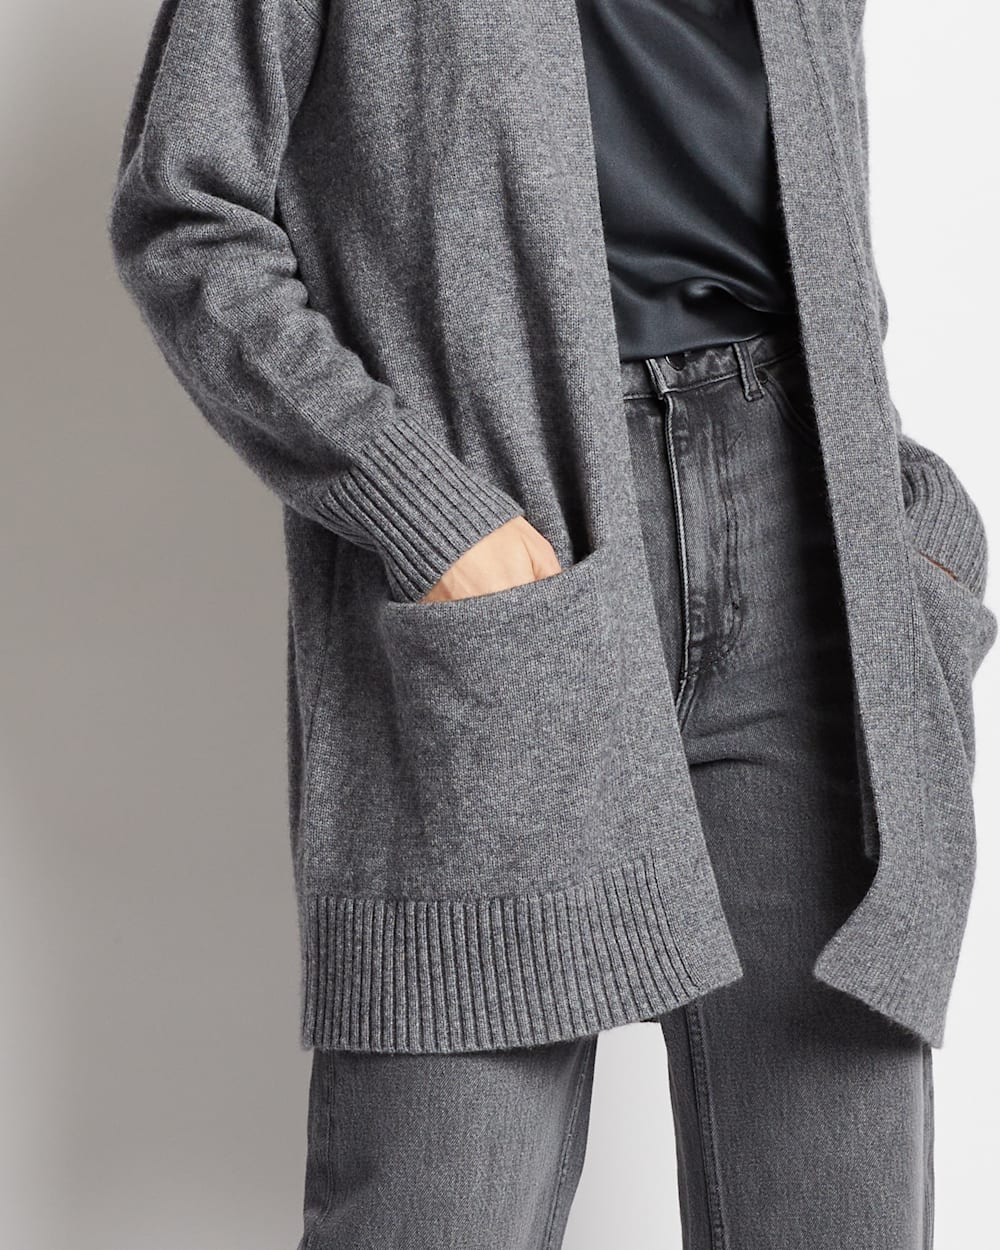 ALTERNATE VIEW OF WOMEN'S MERINO/CASHMERE COCOON CARDIGAN IN CHARCOAL HEATHER image number 2